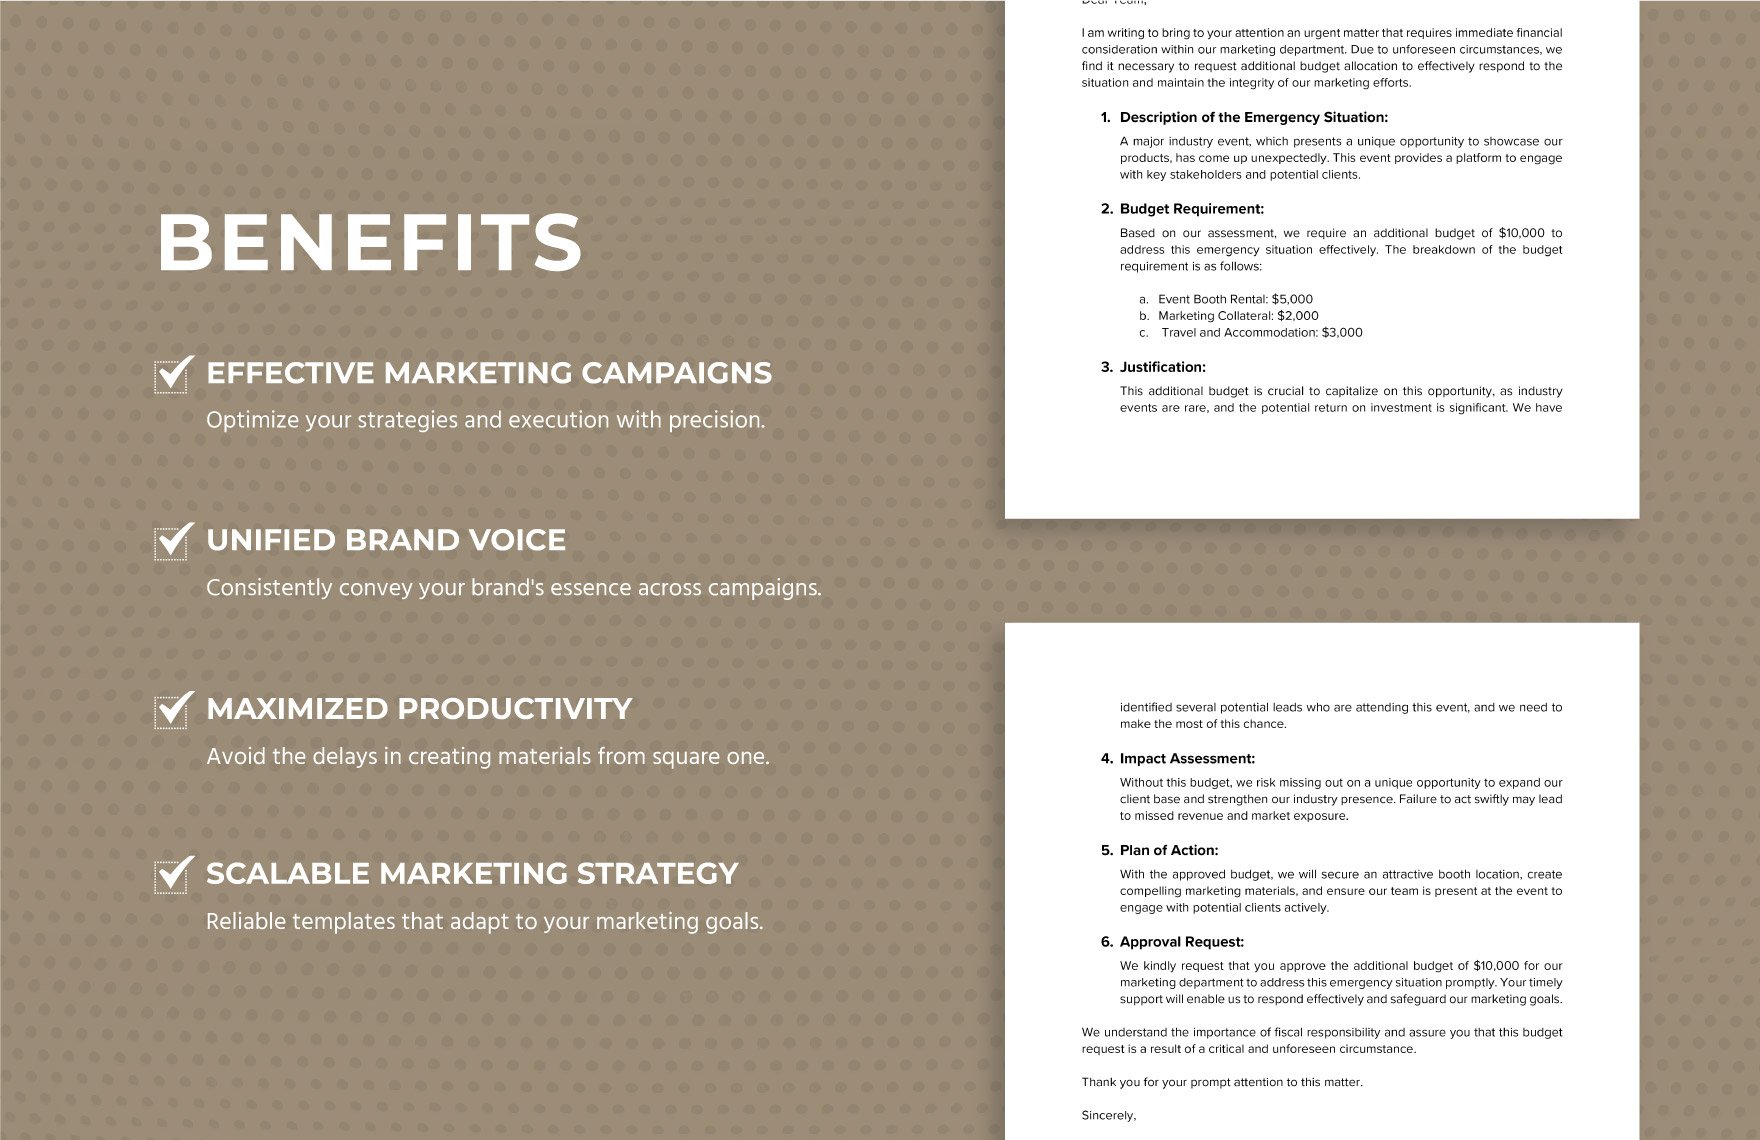 Marketing Emergency Budget Requirement Notice Template